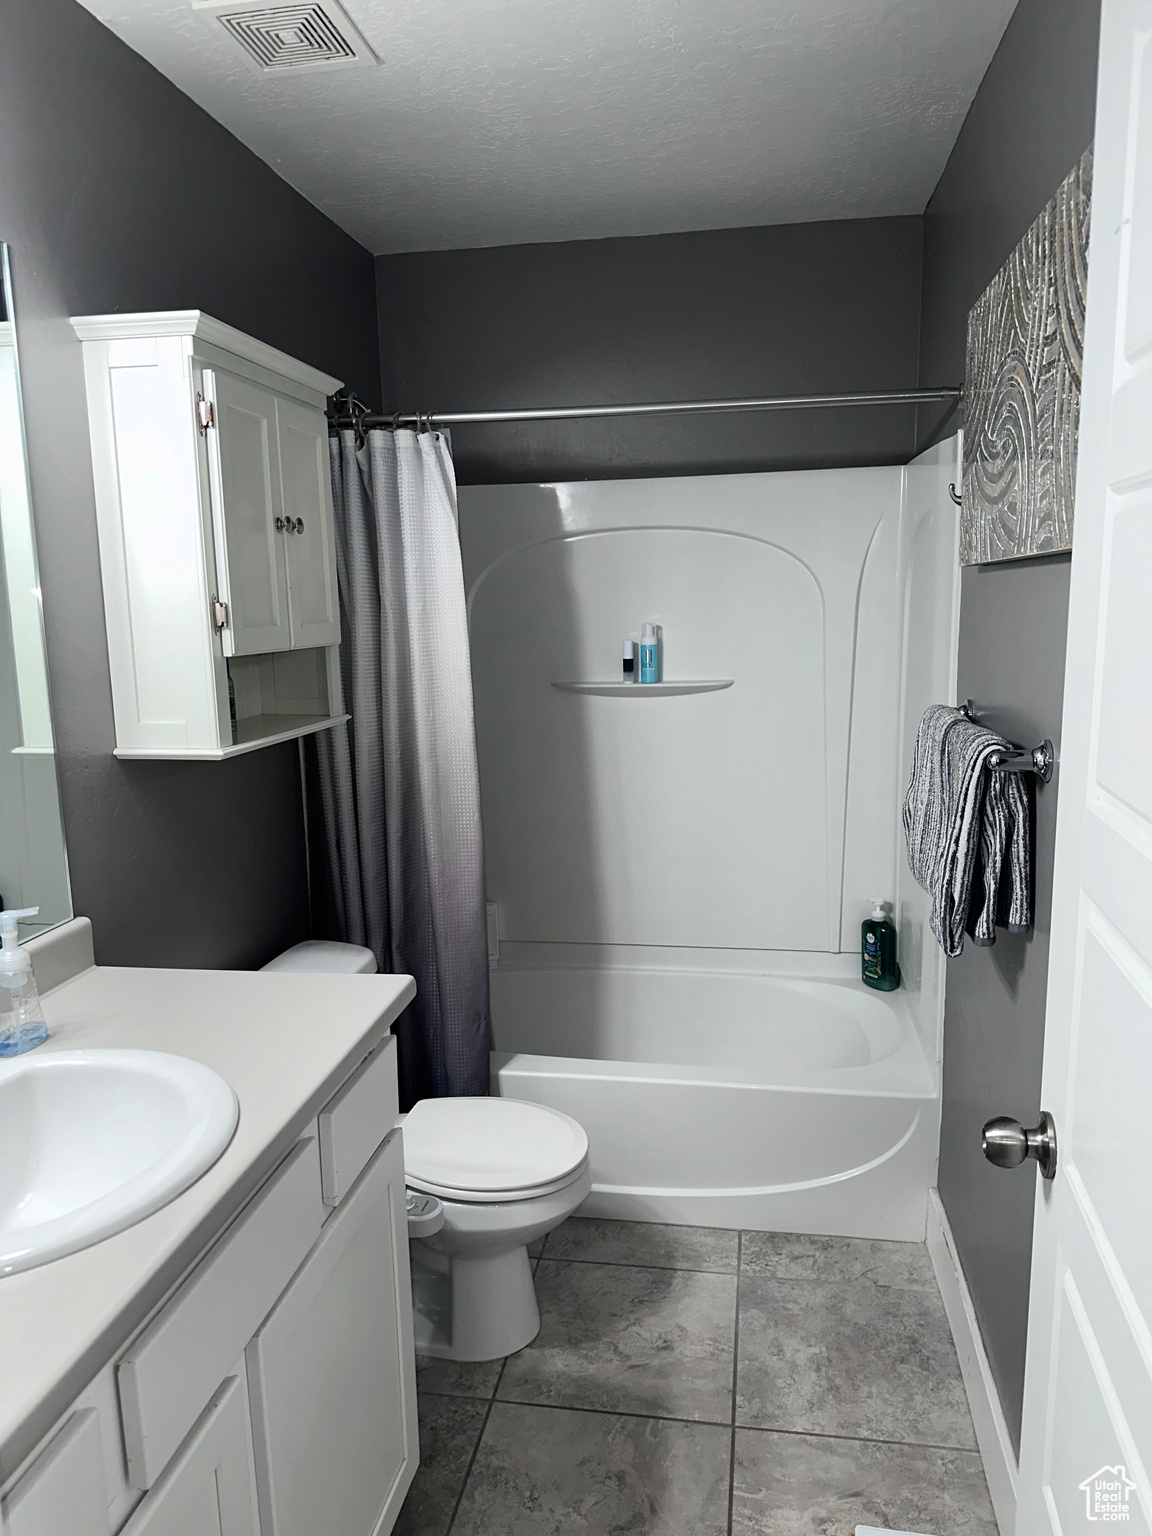 Full bathroom with shower / bath combination with curtain, tile floors, toilet, and vanity